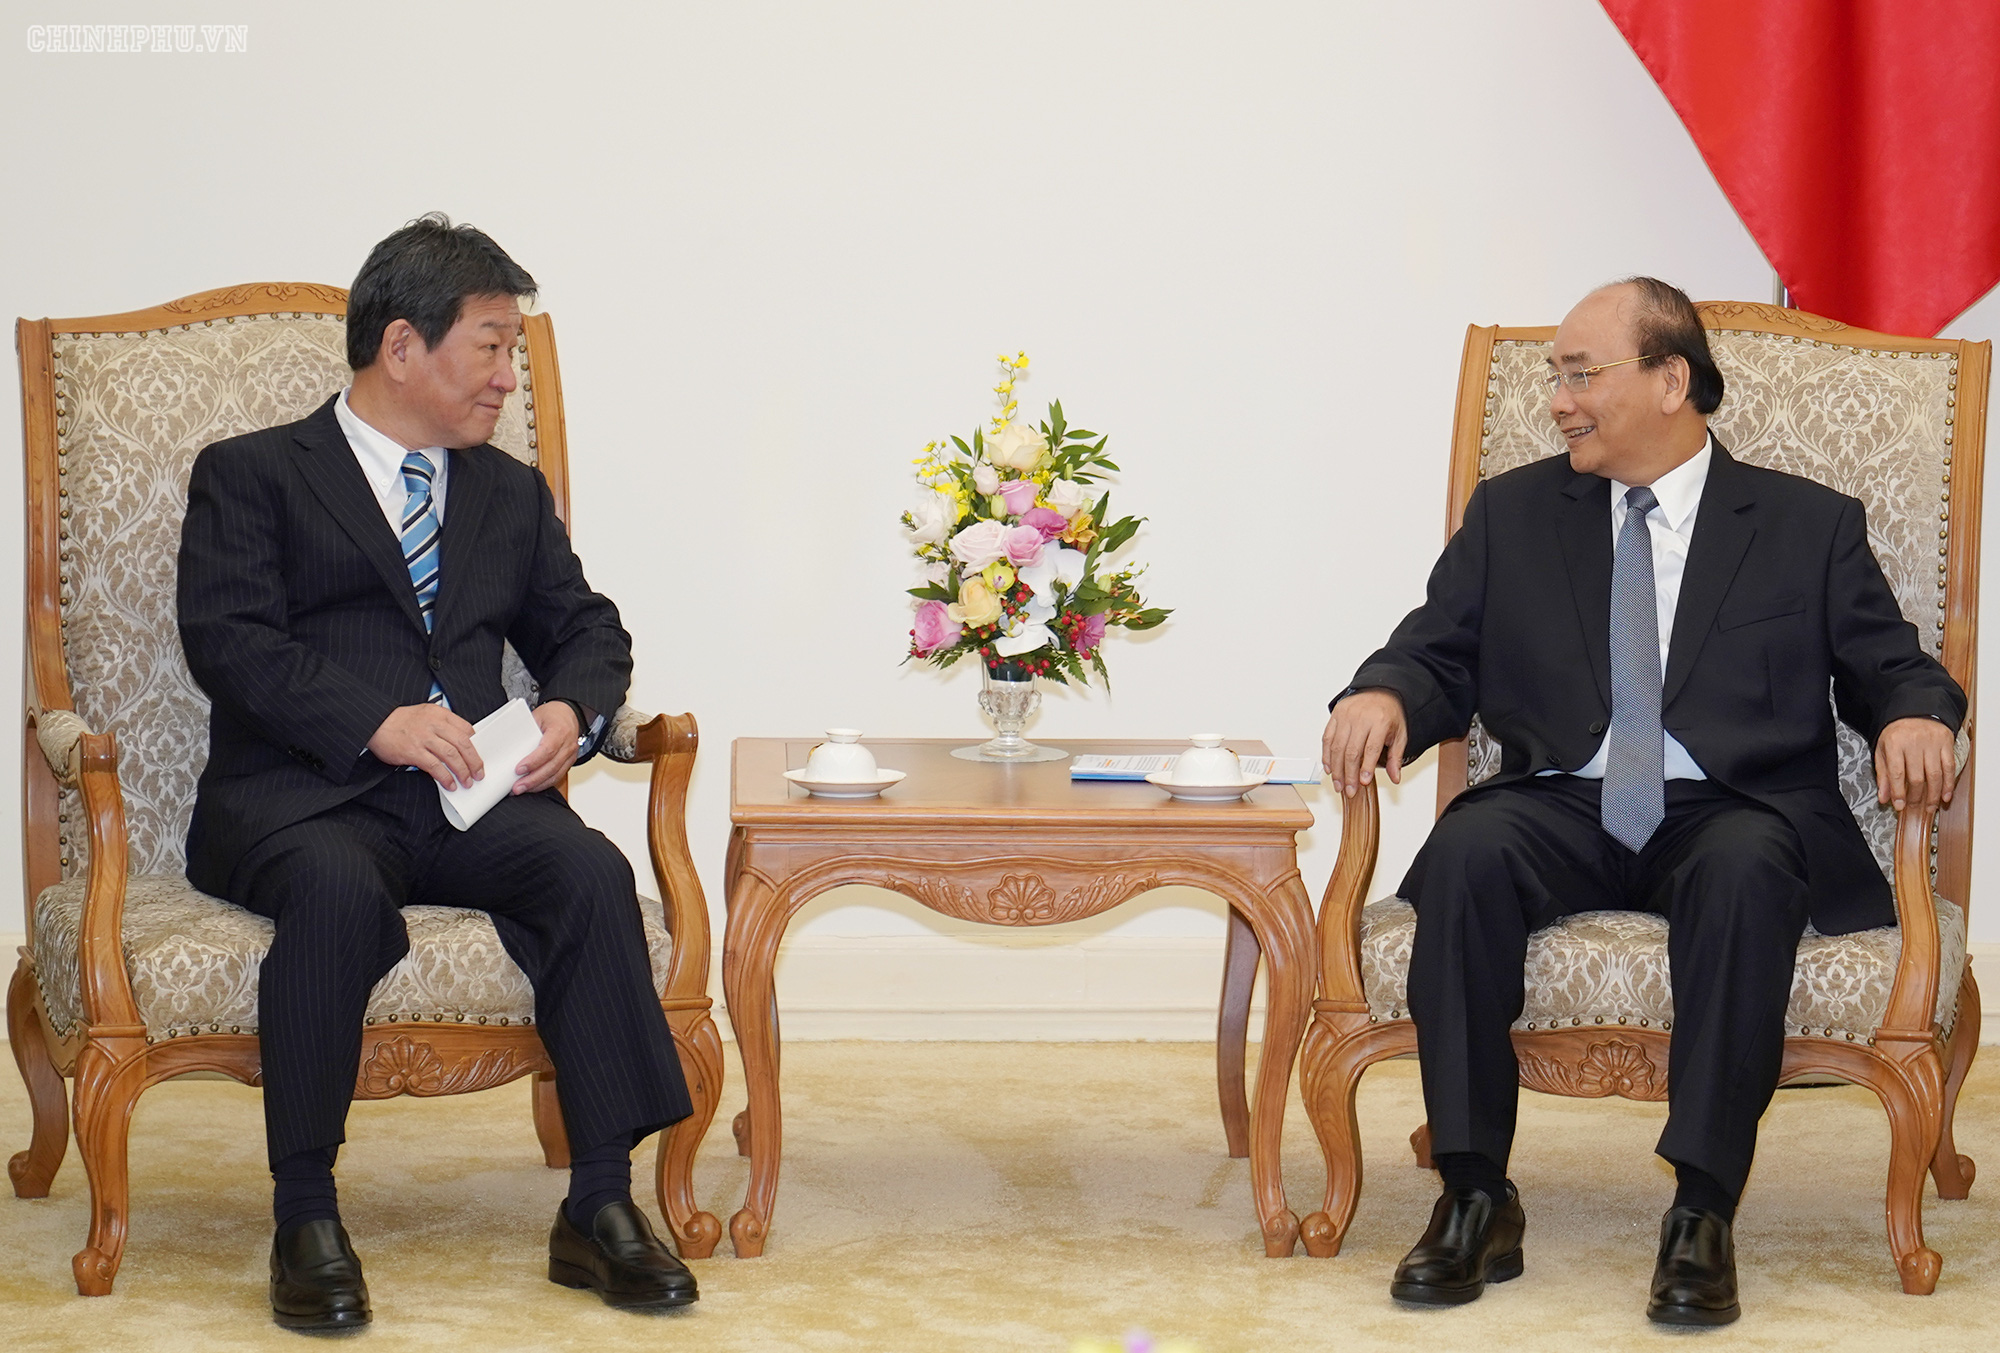 Vietnamese Minister Nguyen Xuan Phuc talks with Japanese Minister for Foreign Affairs Motegi Toshimitsu Minh in Hanoi on January 6, 2020. Photo: Vietnam Government Portal